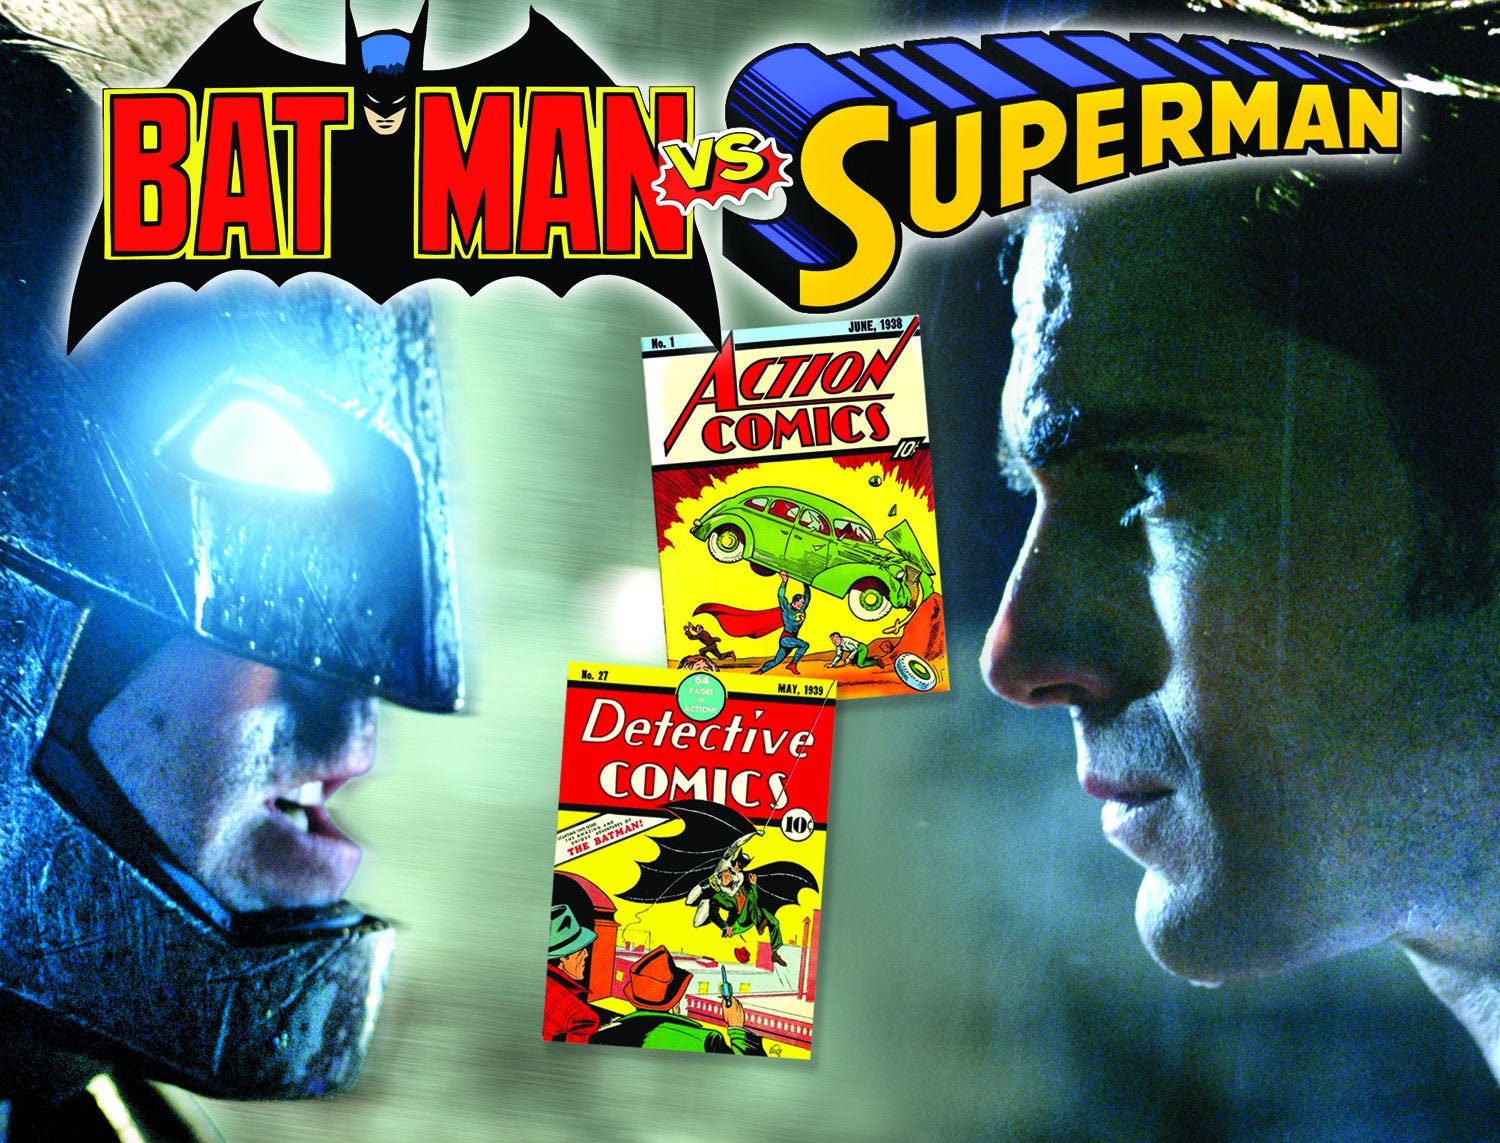 Batman vs. Superman: Which superhero is the better character?